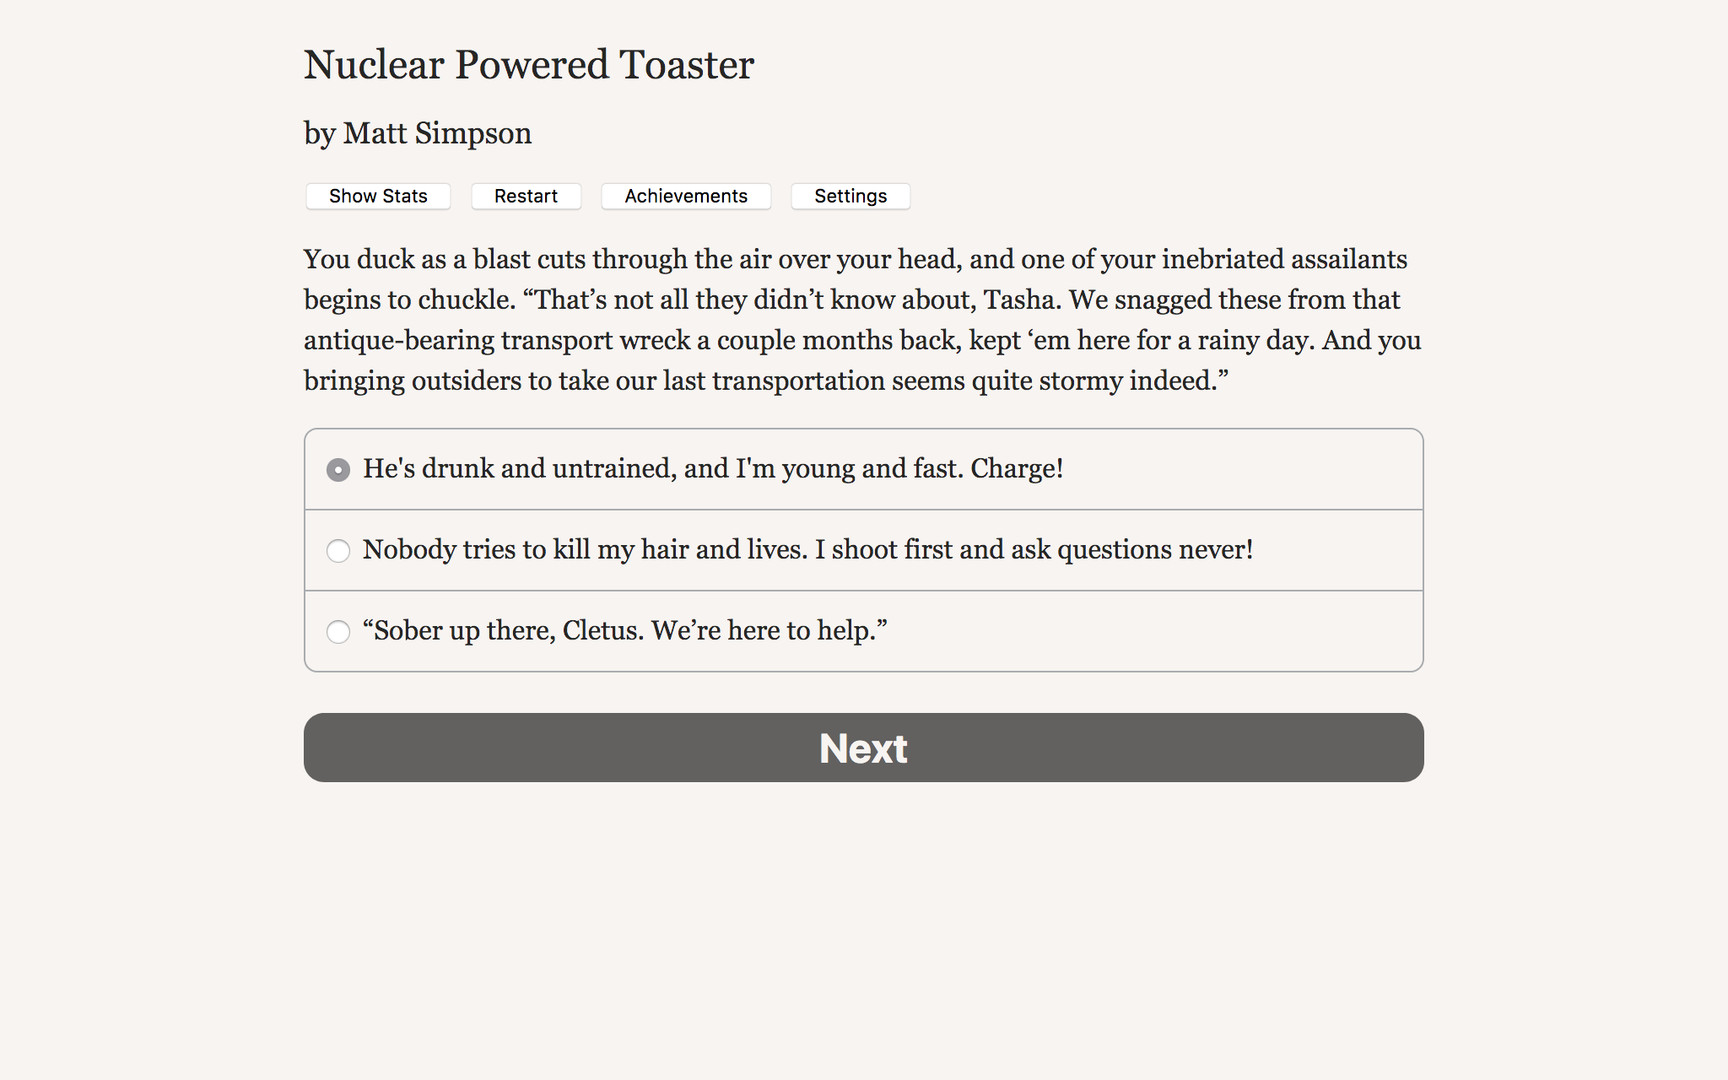 Nuclear Powered Toaster Featured Screenshot #1